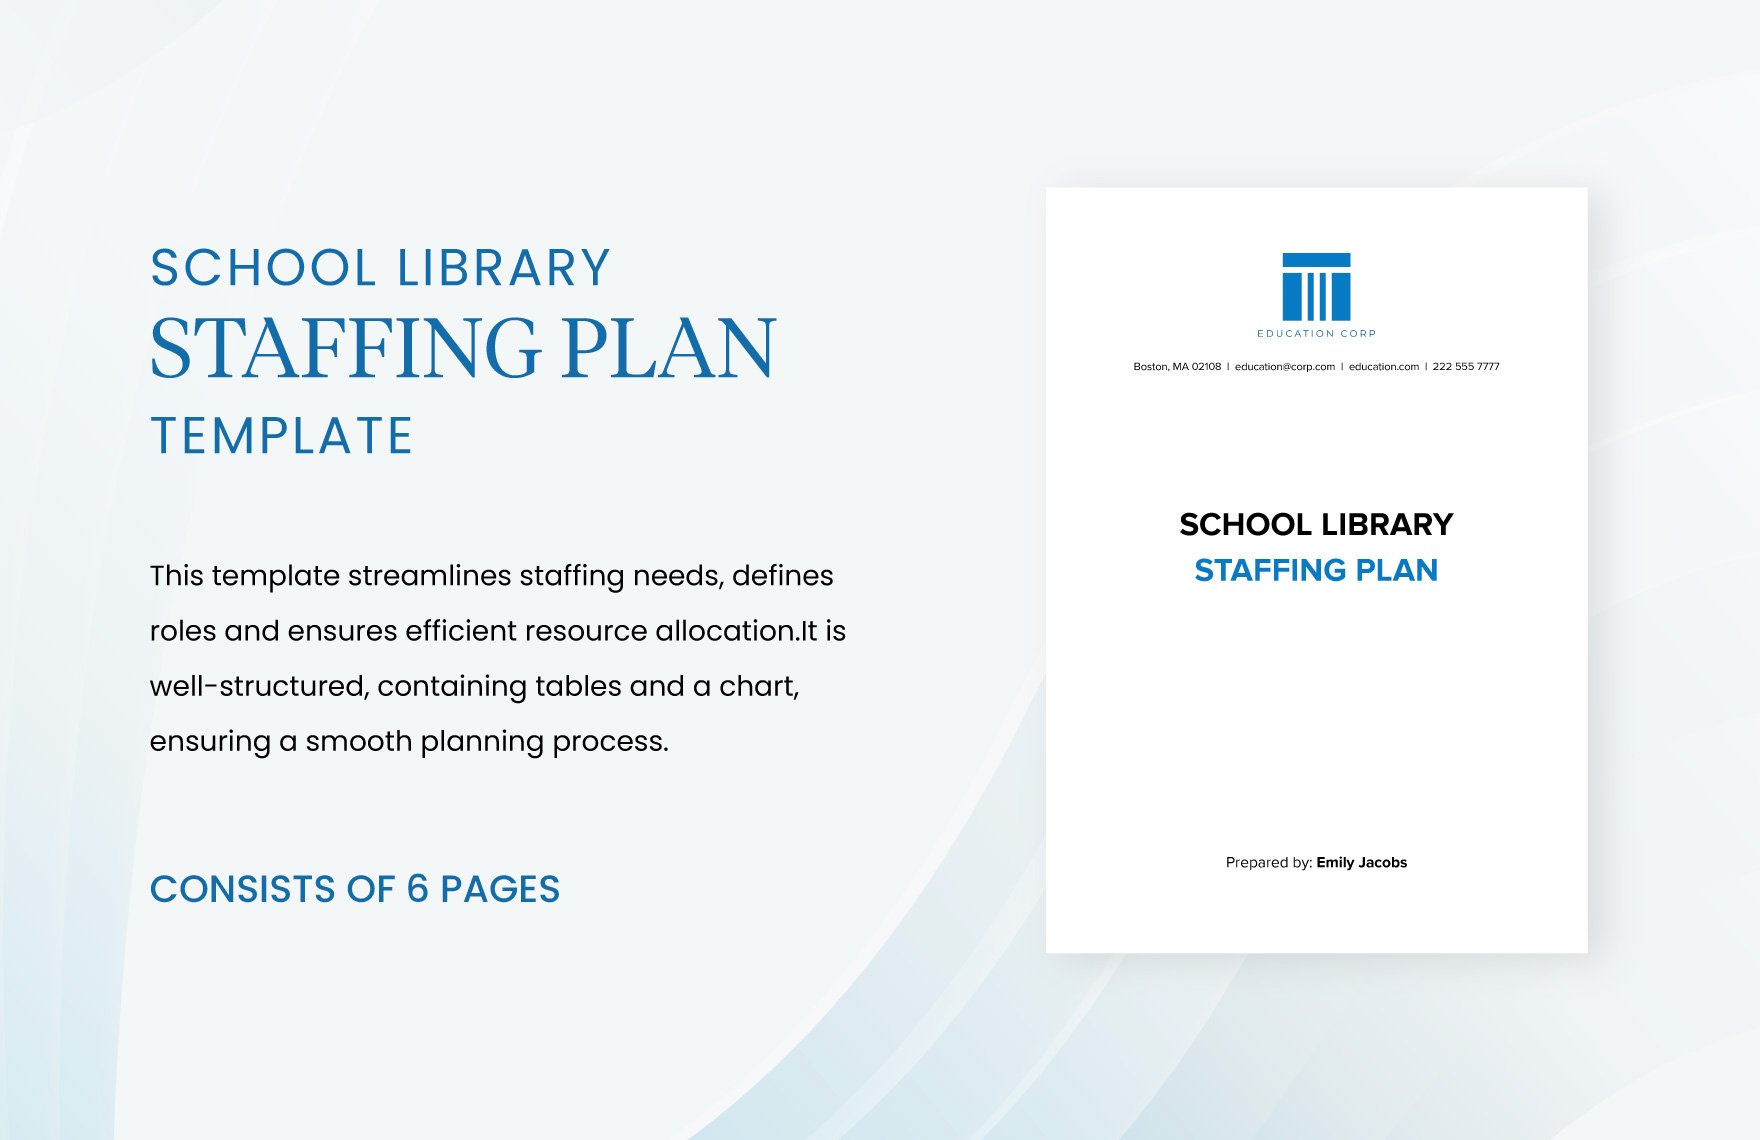 School Library Staffing Plan Template